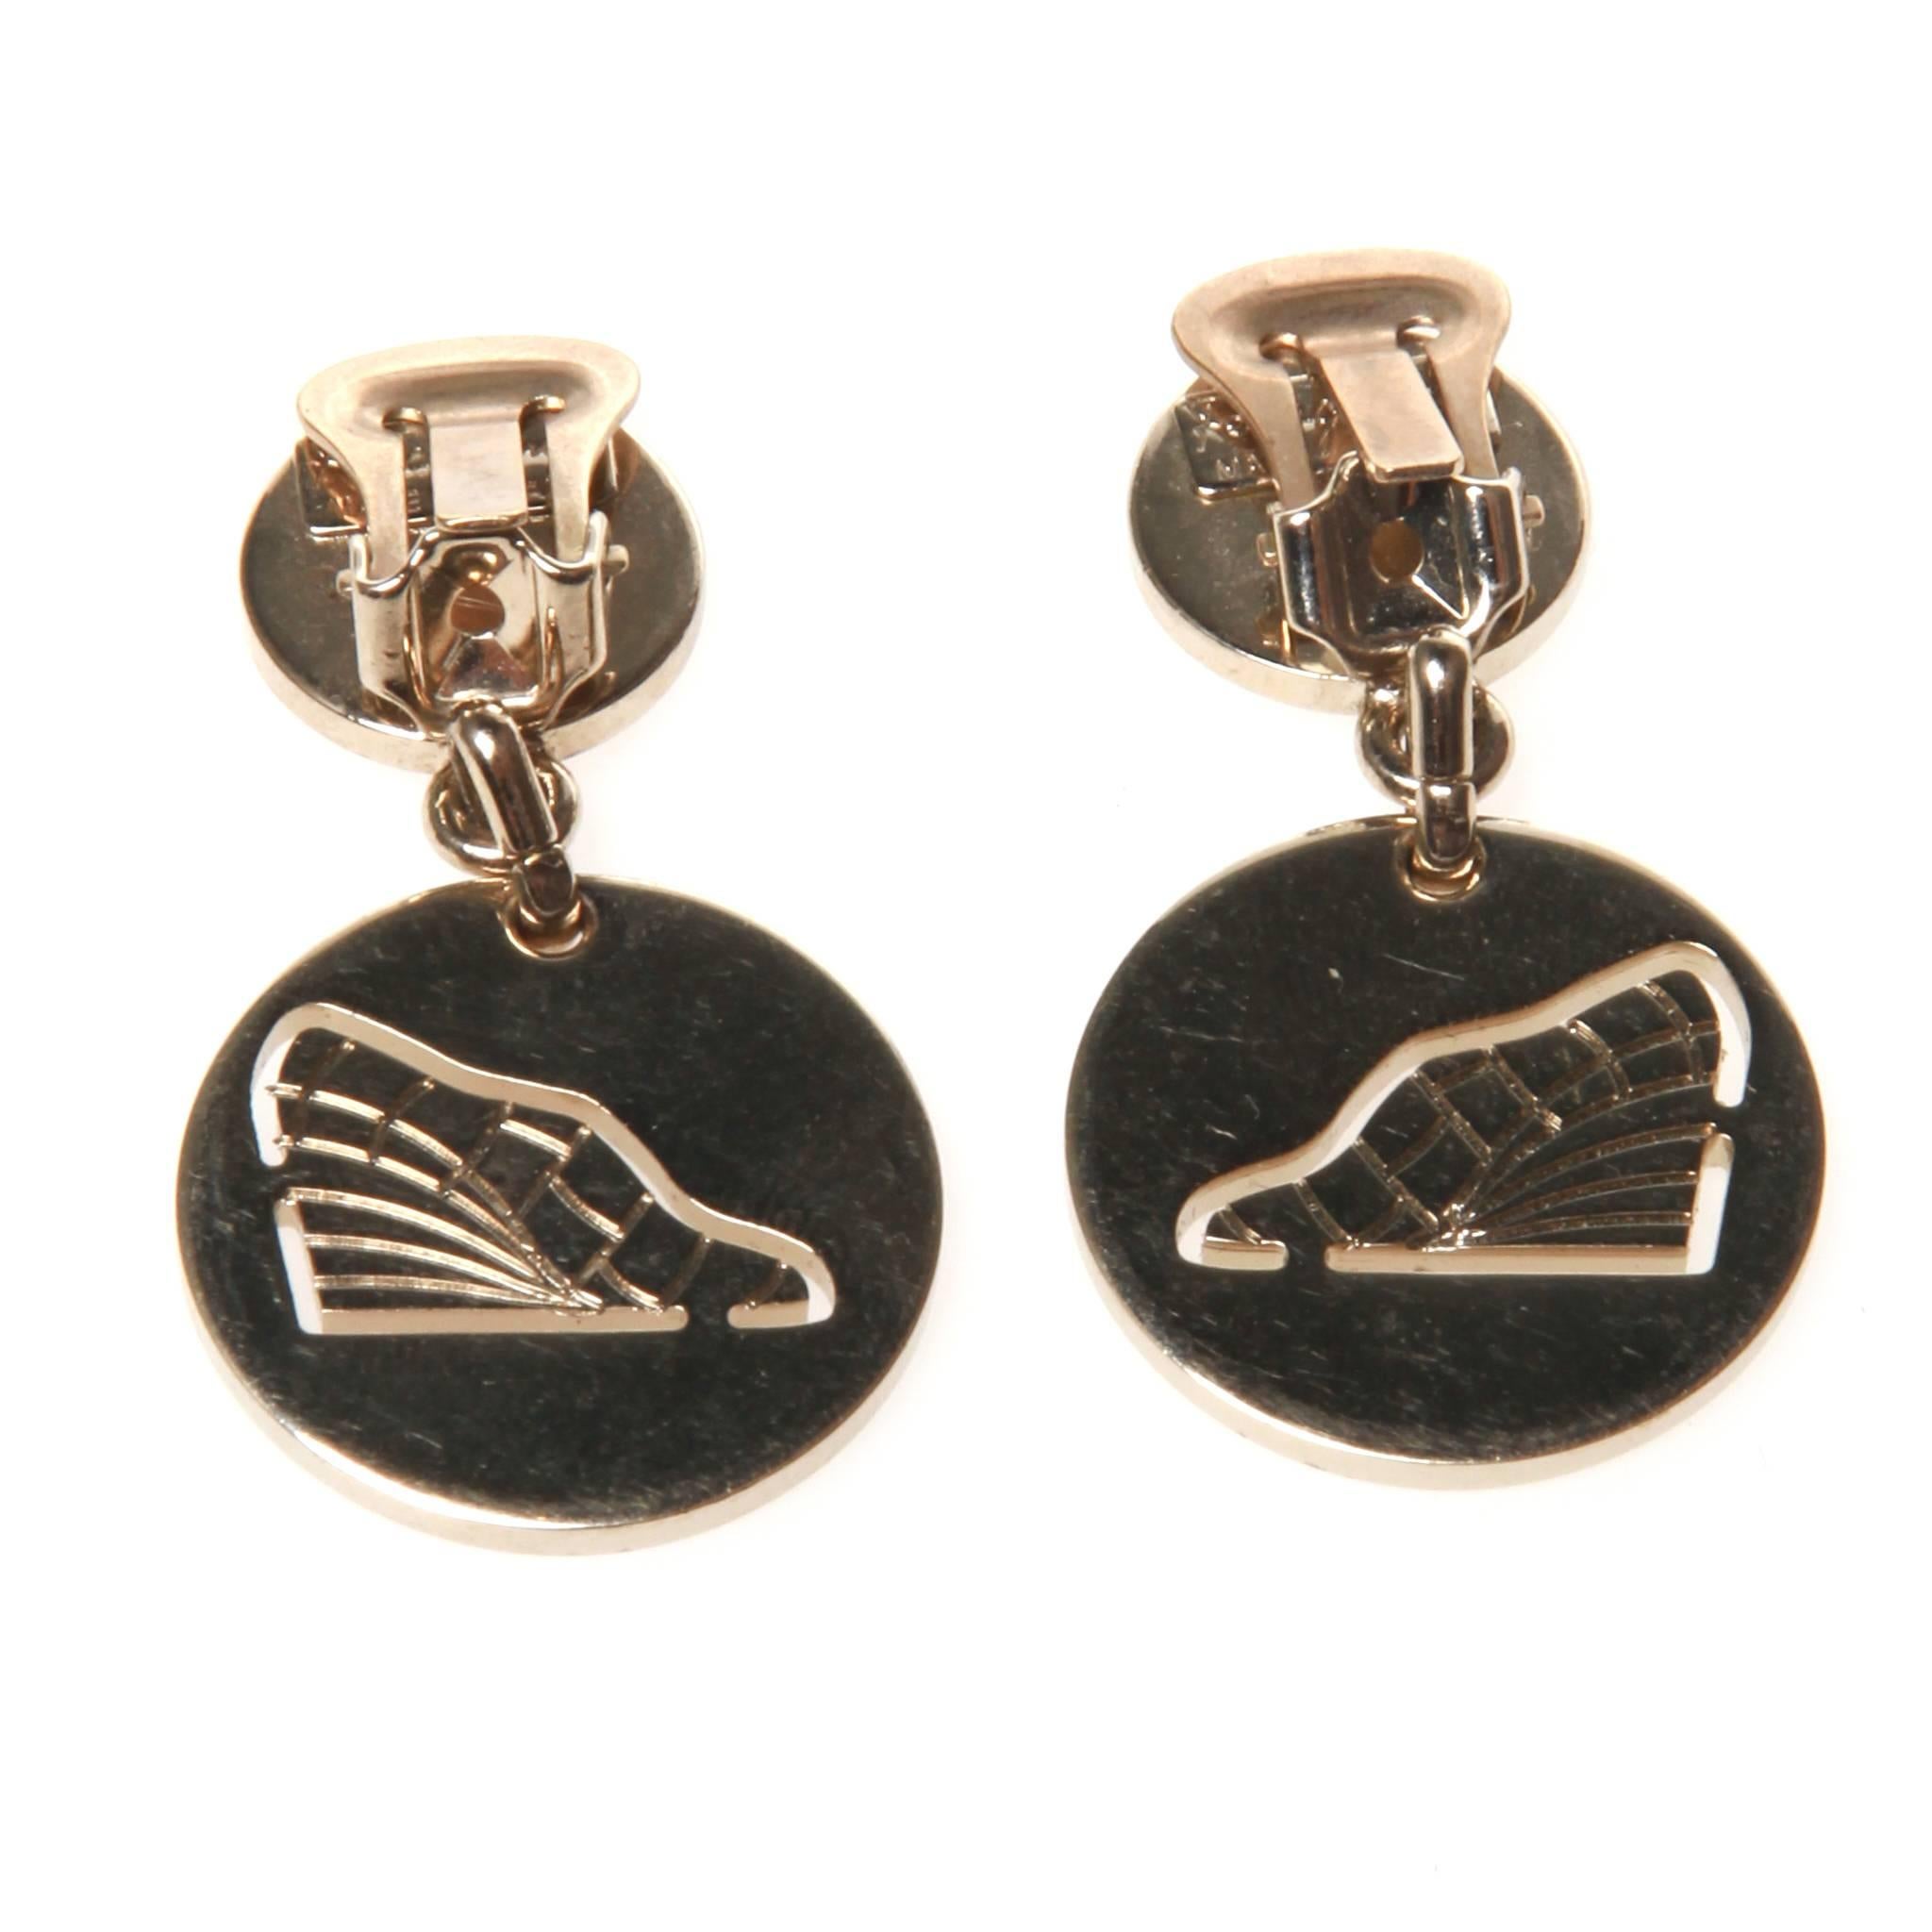 Salvatore Ferragamo clip on earrings in silver-tone metal featuring a drop design with cut-out image. 